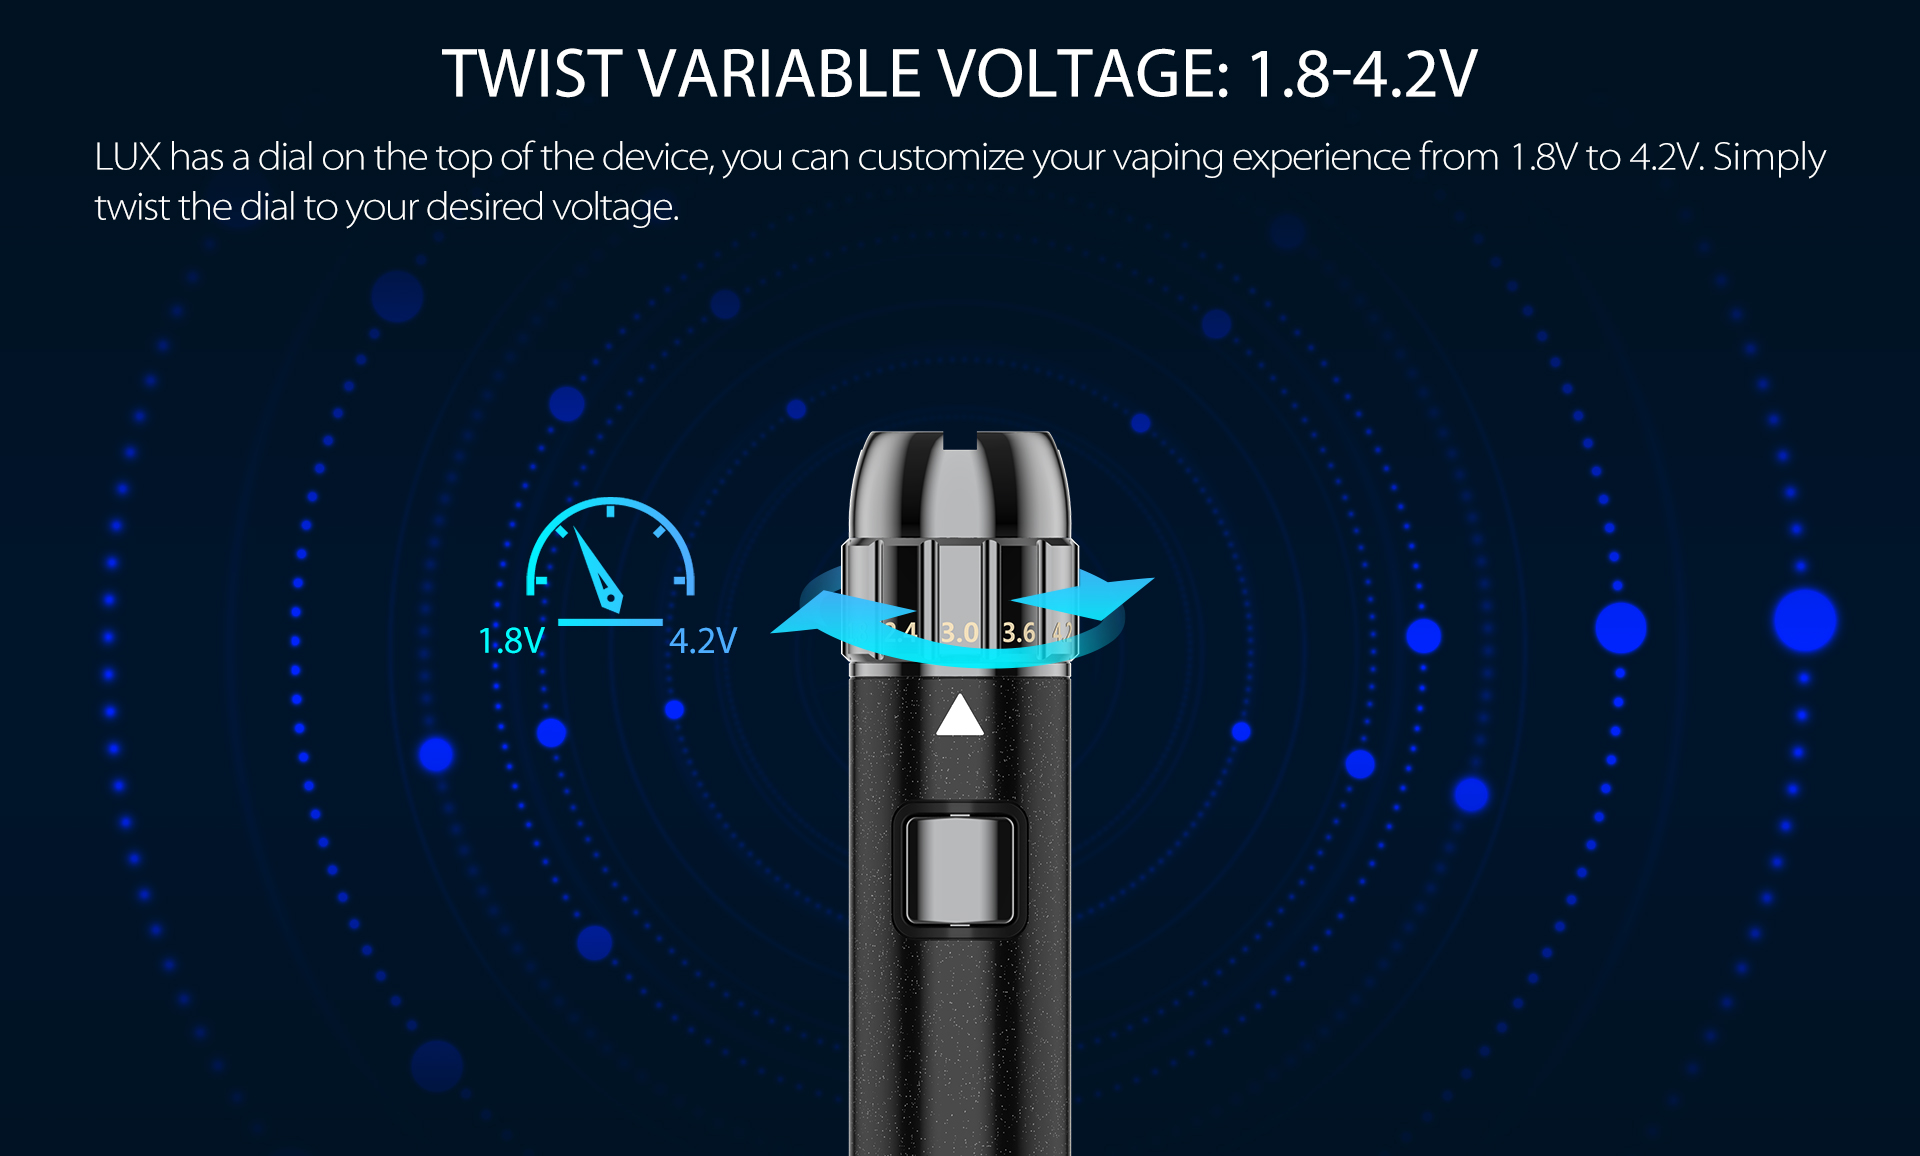 Simply twist the Yocan LUX dial to your desired voltage.